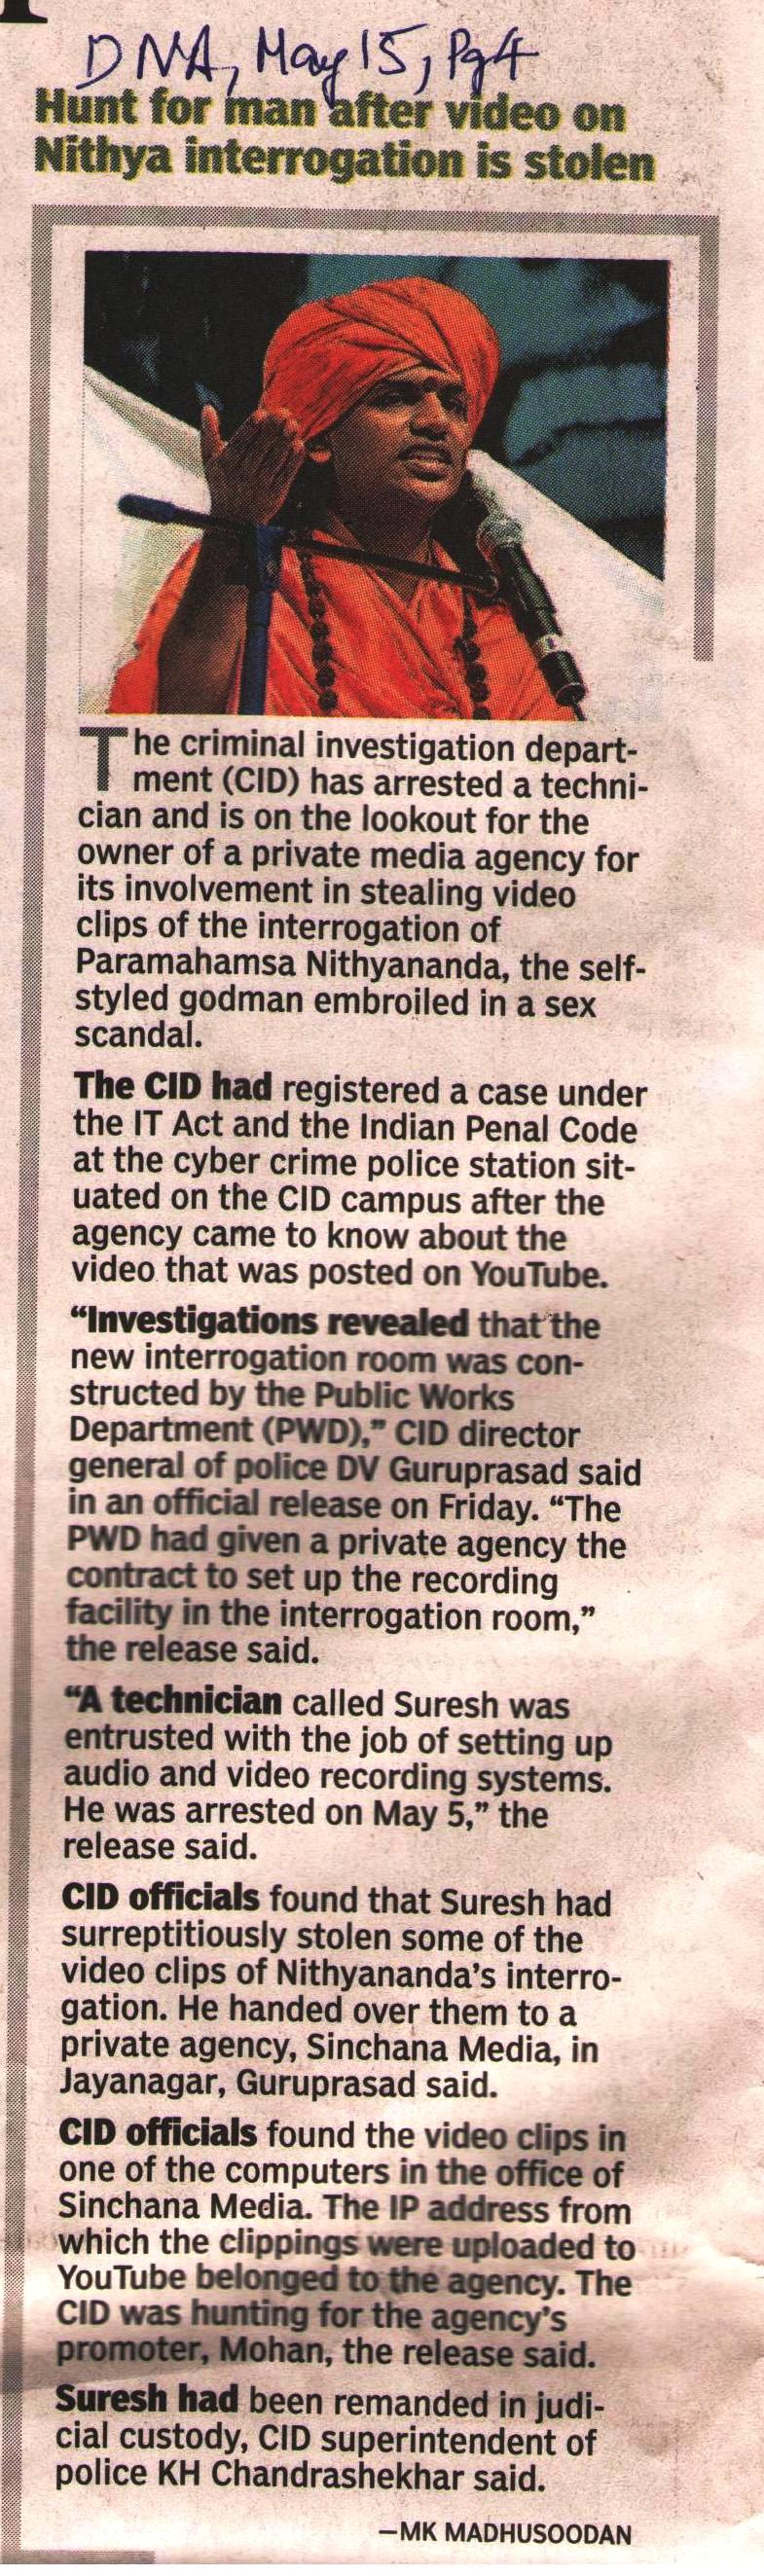 DNA_May 15 2010_Pg 4_Hunt for man after video on Nithyanandas interrogation is stolen_Bangalore